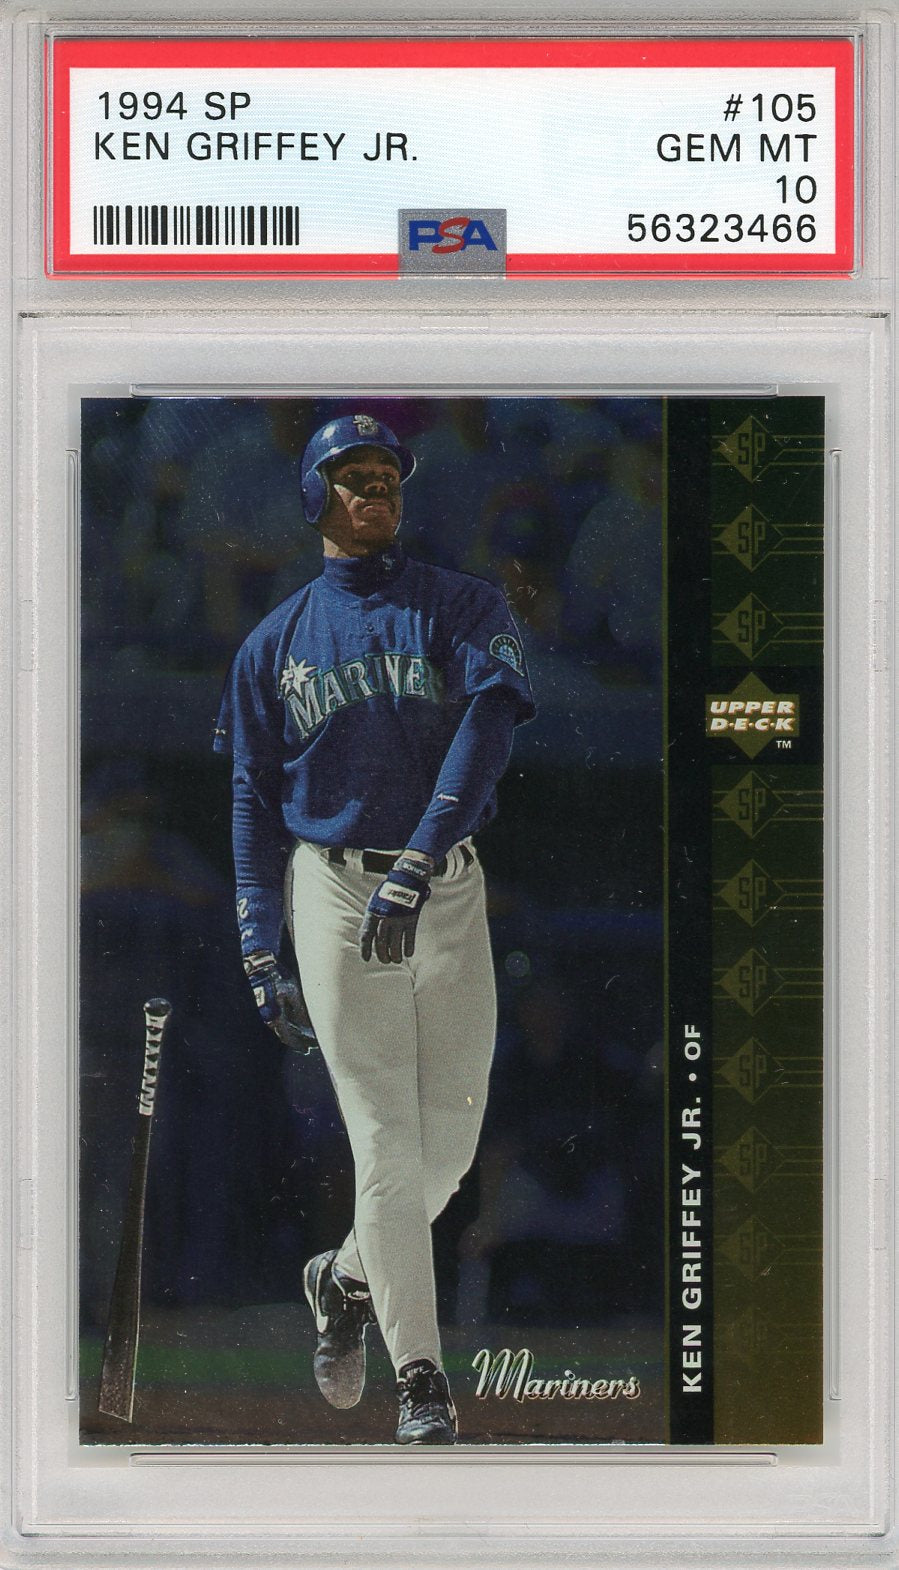 Ken Griffey Jr 2001 Upper Deck All Star Game Salute Game Used Jersey Relic  Autographed Card - PSA Encapsulated Authentic Auto